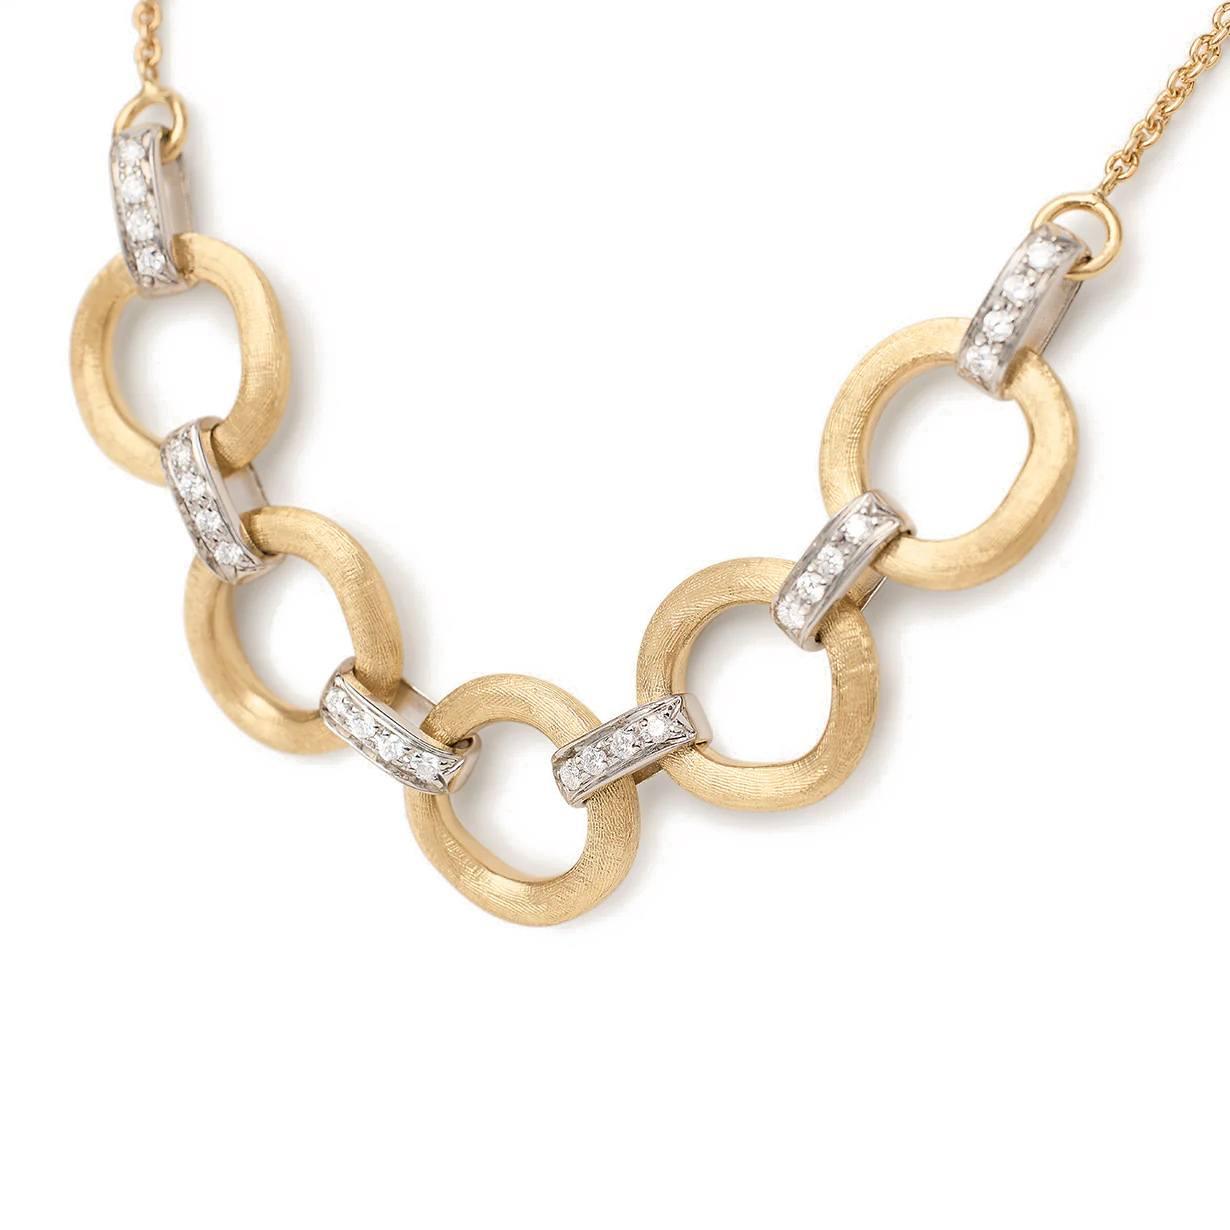 Marco Bicego Jaipur Link Collection 18K Yellow & White Gold Five Link Diamond Half Collar Necklace 2